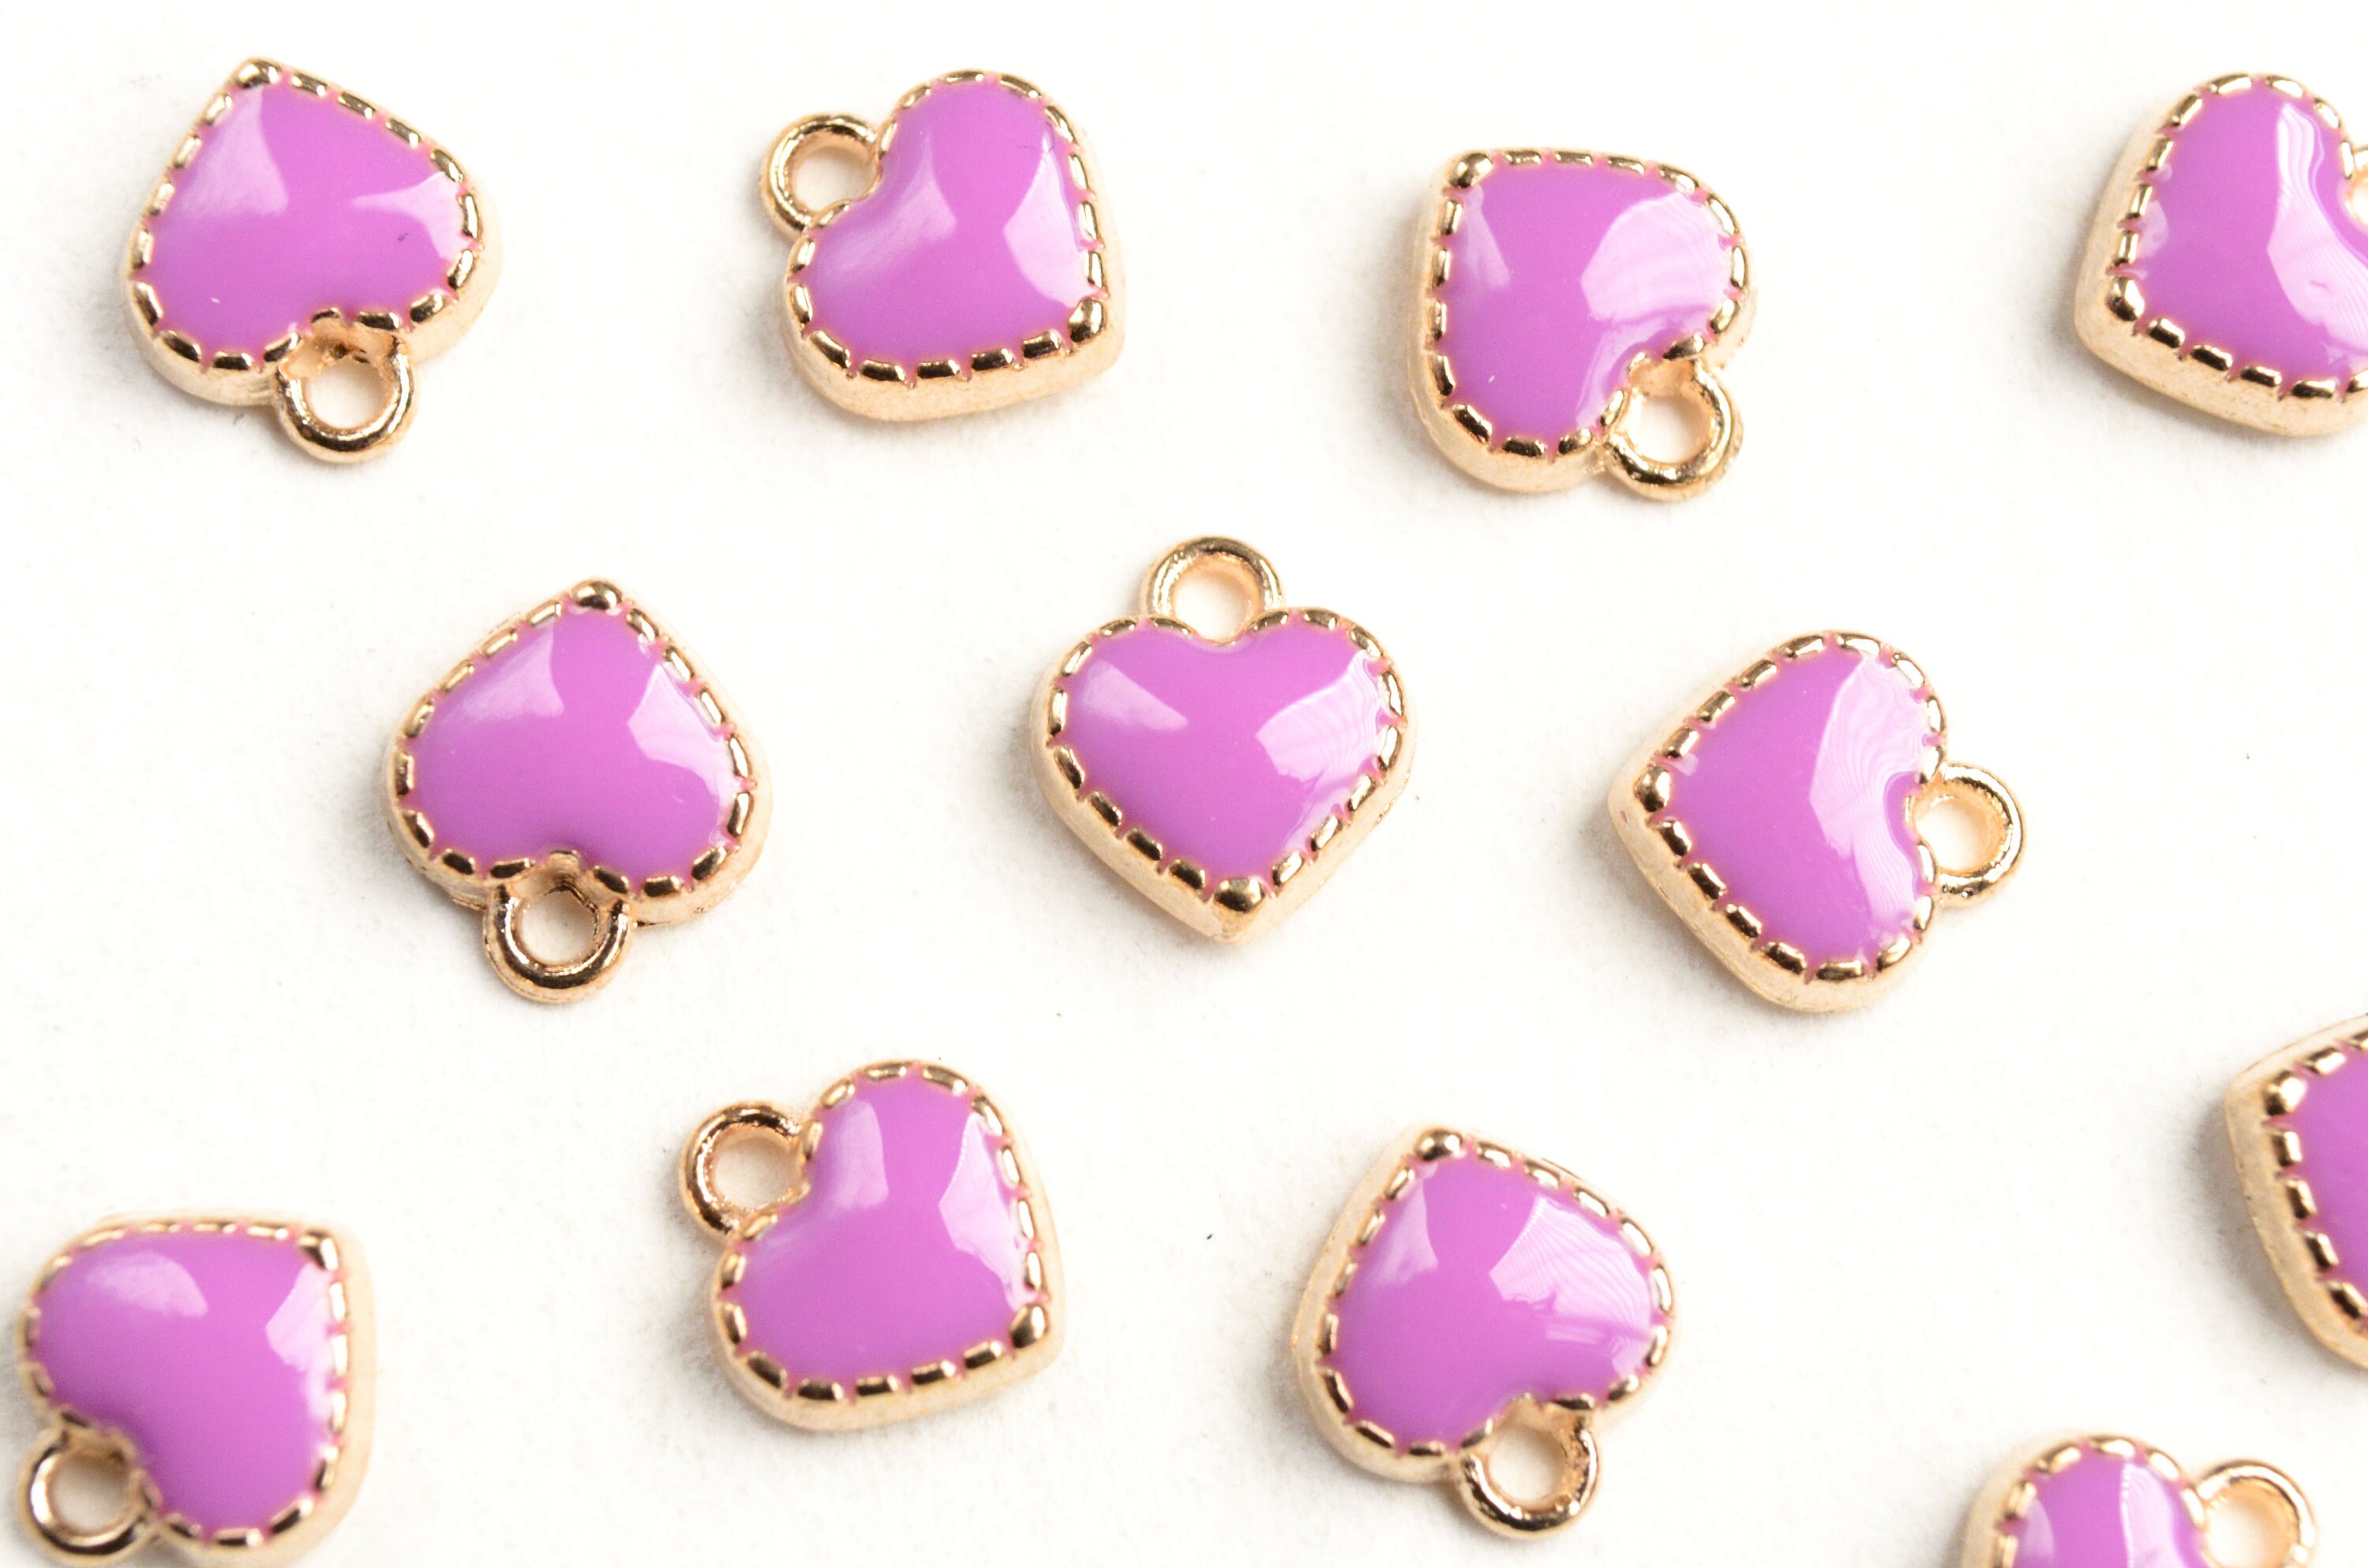 Purple Heart Charms for Jewelry Making, Lavender Purple Beads for Neck